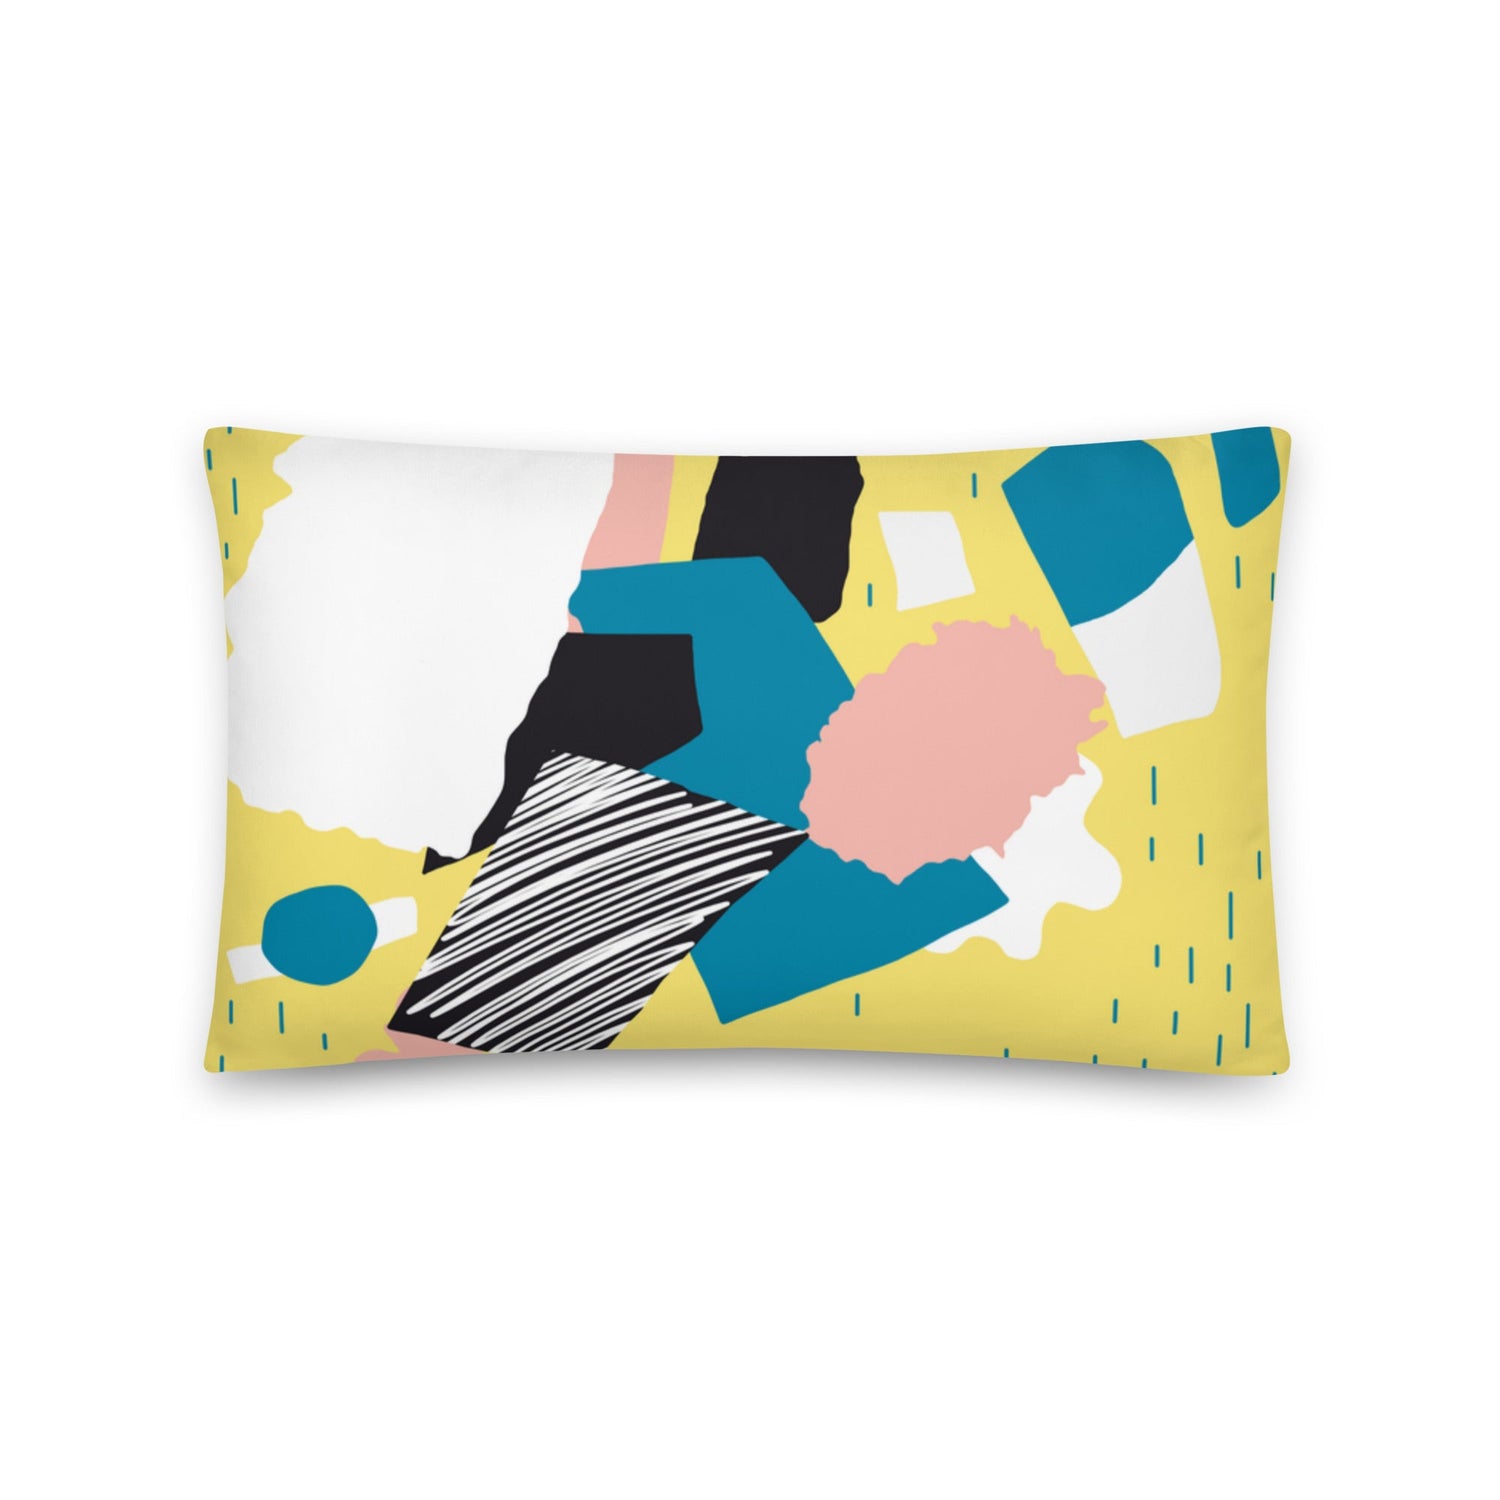 Julieto Premium Cushion Cover Cushion Cover Great Functional Goods 